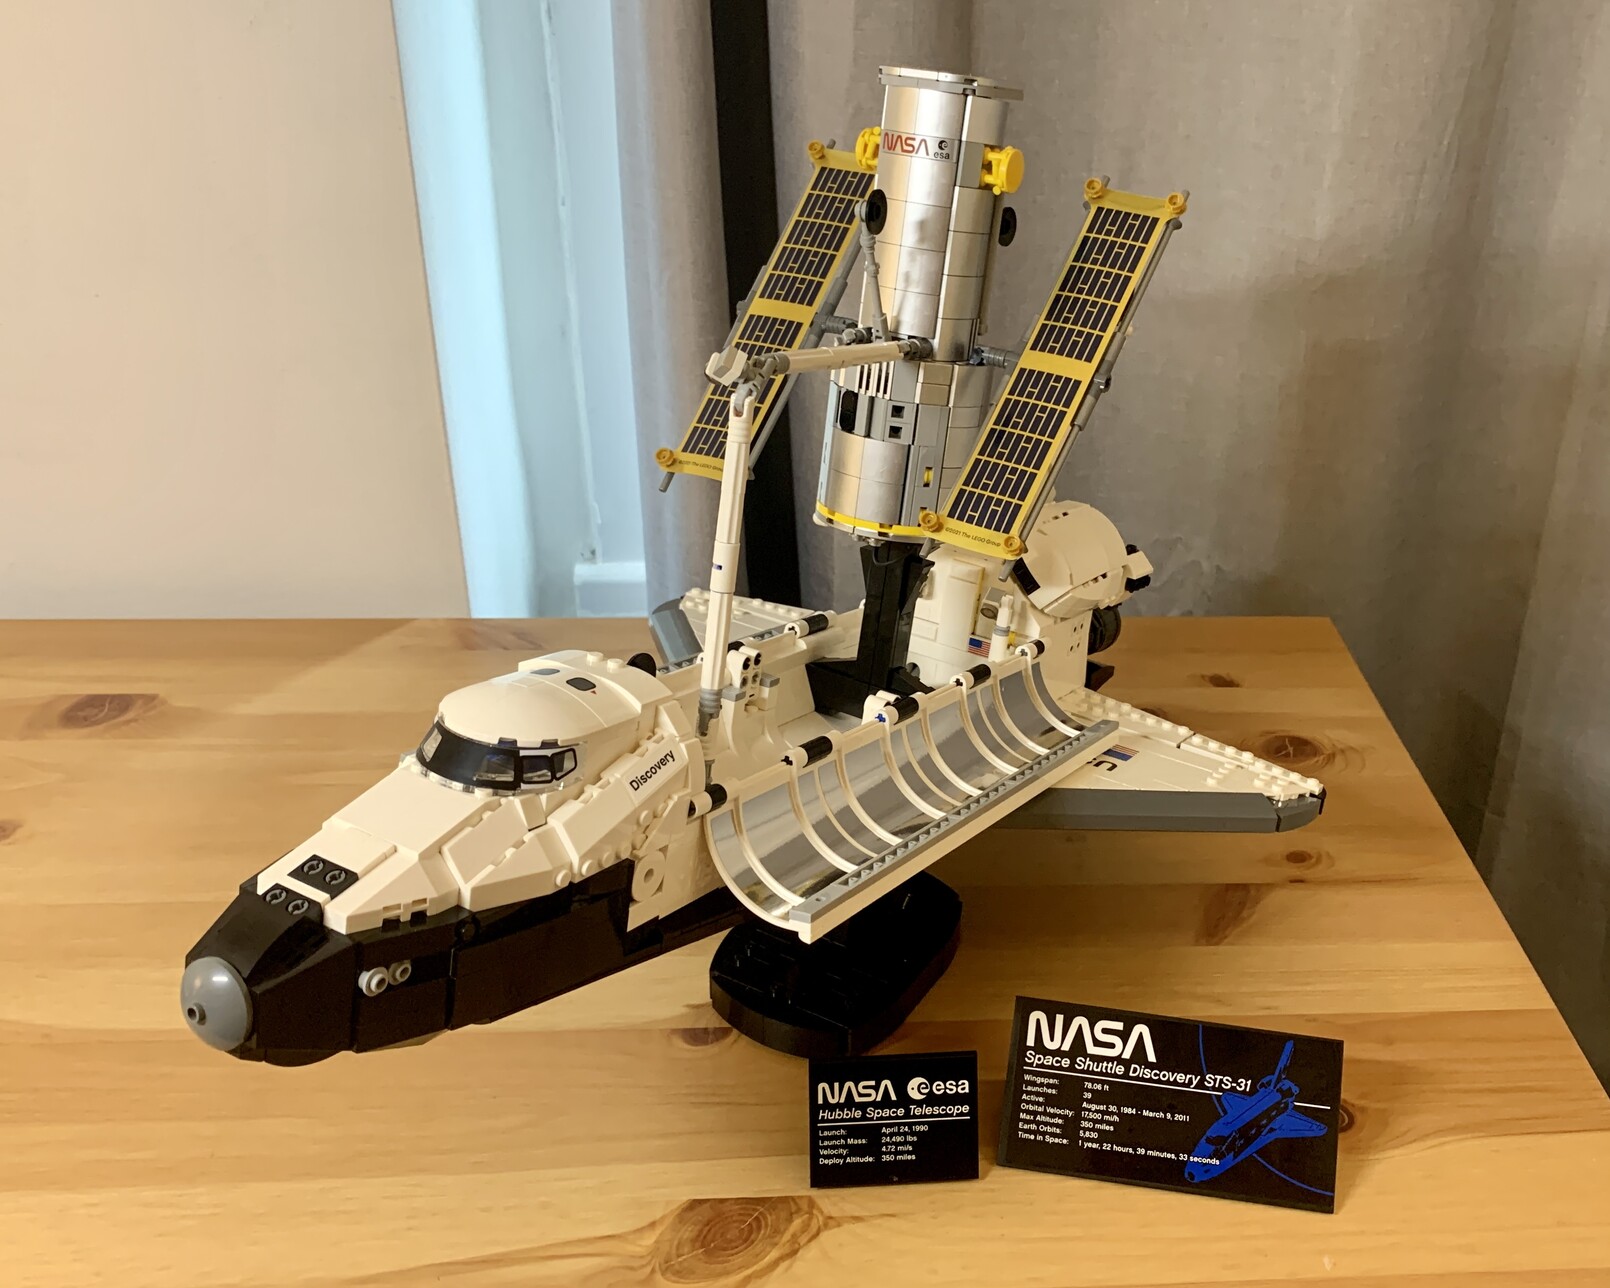 Lego Space Shuttle Discovery facing with its nose bottom left on a stand. Its cargo bay doors are open showing the Hubble space telescope above it. The Hubble is on a black stand and is pointing upwards. Its solar panels are deployed and it is connected to the Space Shuttleâ€™s manipulator arm. In front of the model are two plaques with details of the two space craft.